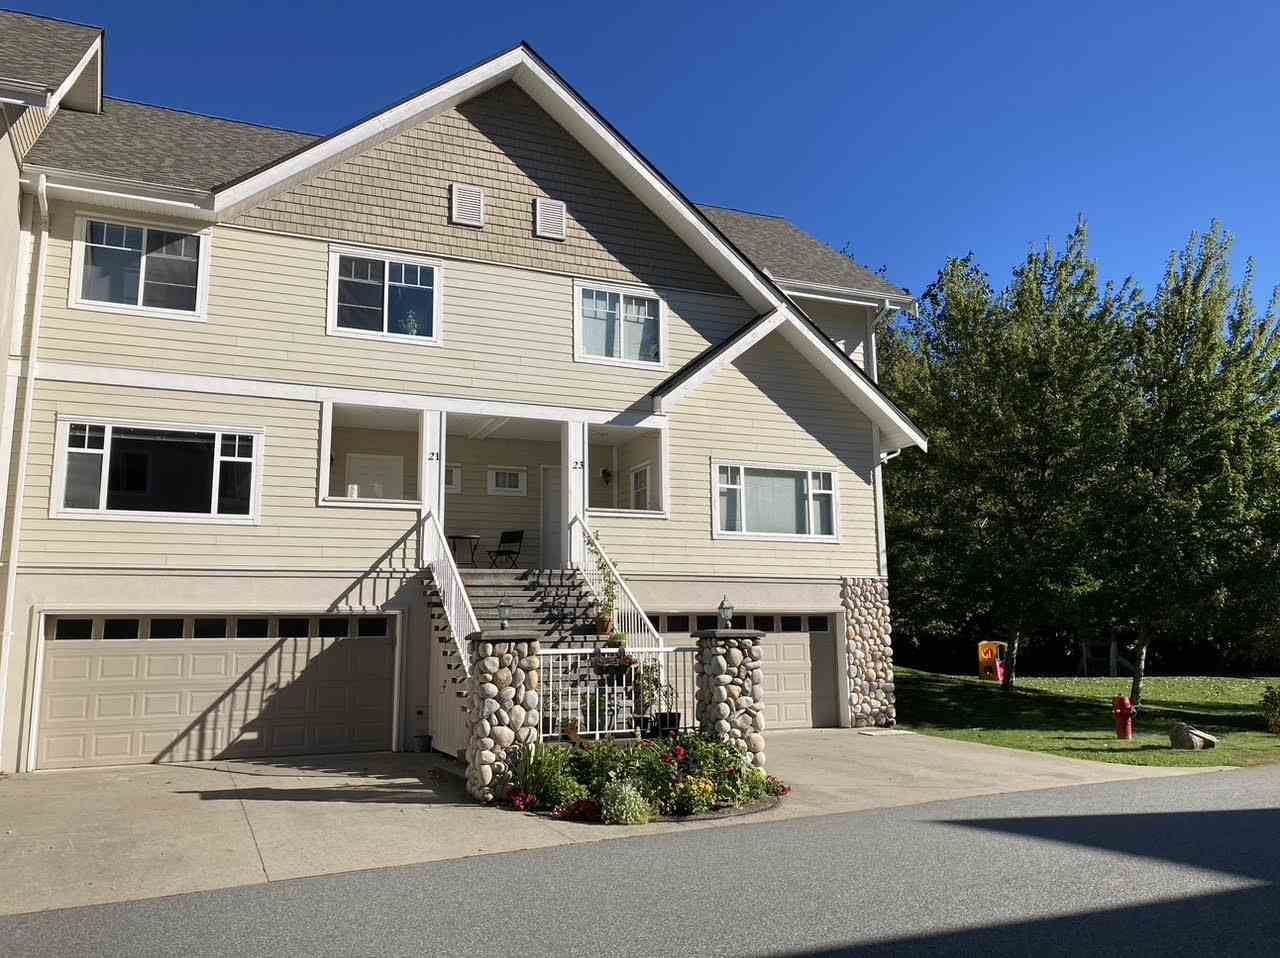 Main Photo: 21 1200 EDGEWATER Drive in Squamish: Northyards Townhouse for sale : MLS®# R2514727